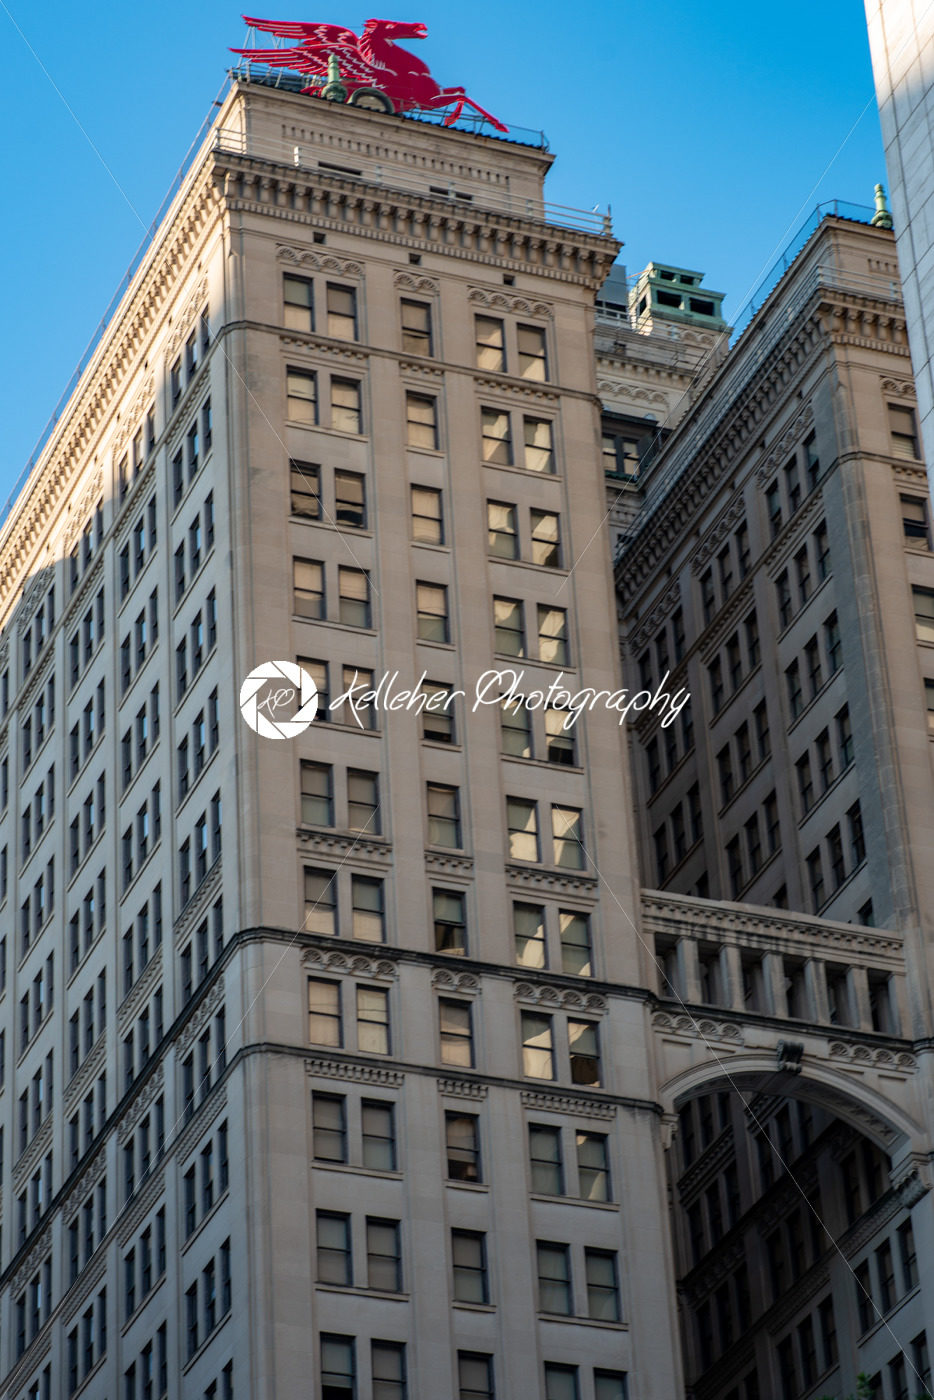 Dallas, Texas – May 7, 2018: The Pegasus seen on top of the Magnolia Building - Kelleher Photography Store